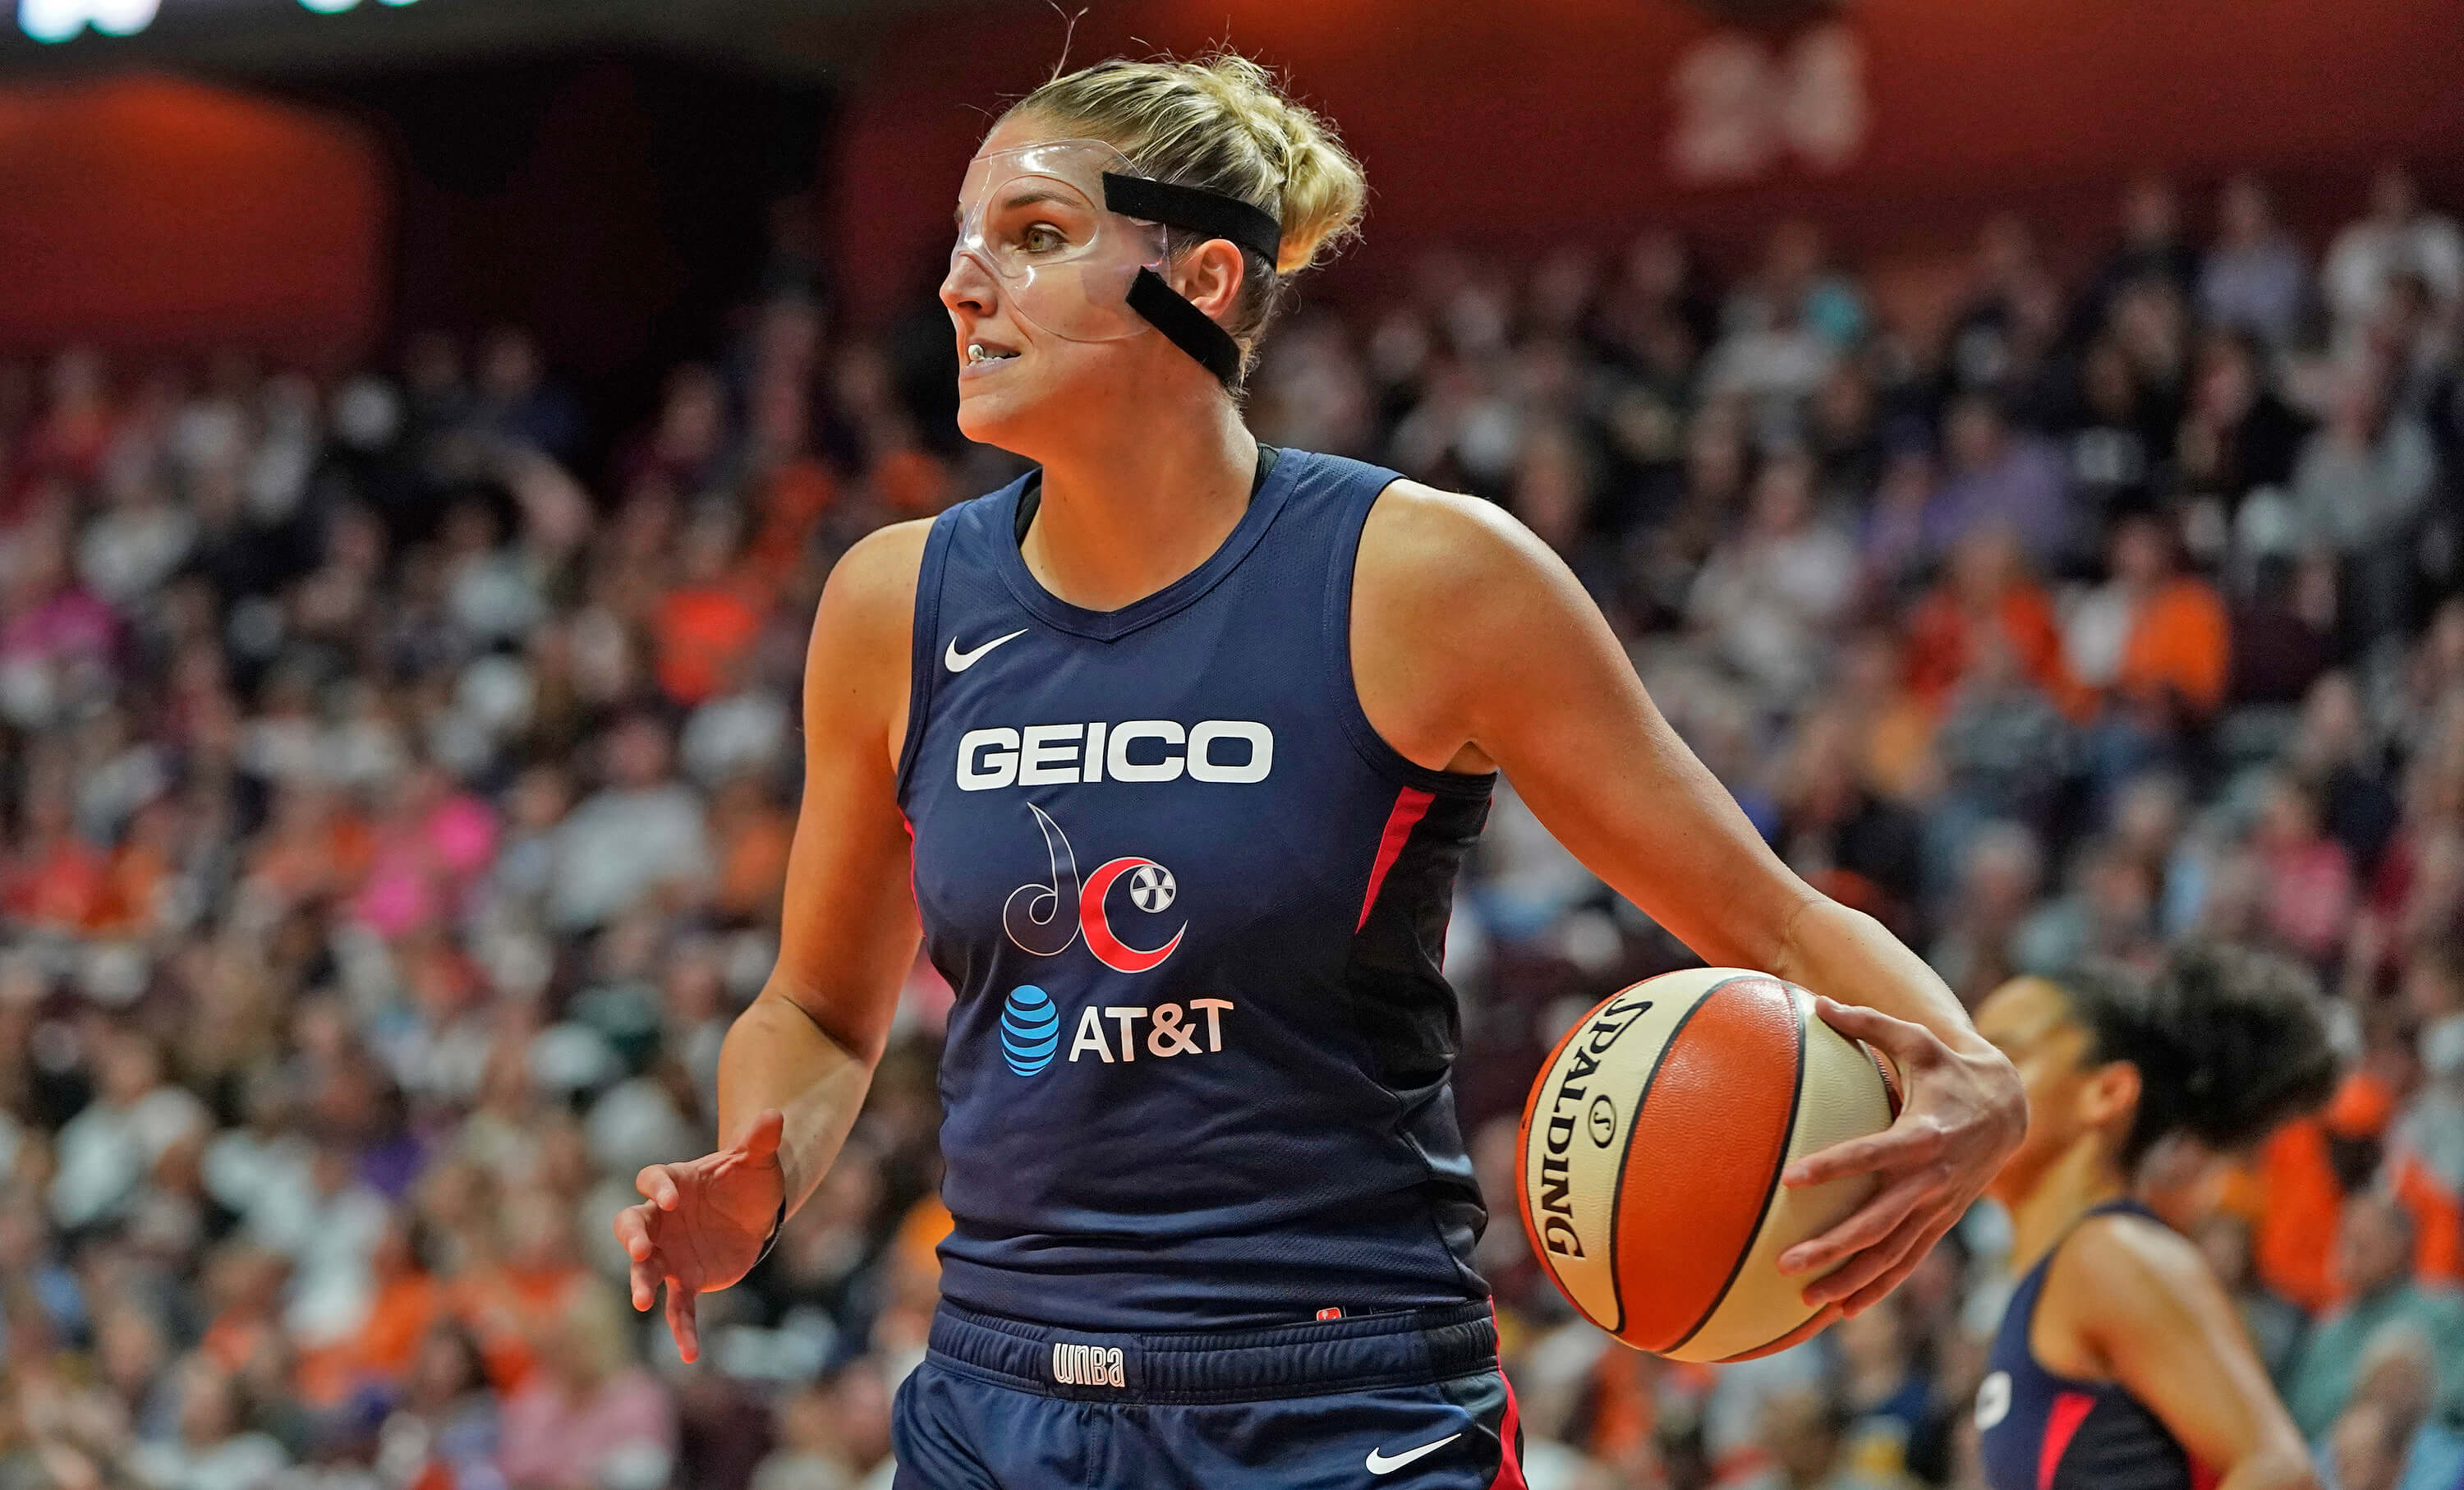 How To Bet - Mystics vs Storm Picks and Predictions: Delle Donne is the X-Factor